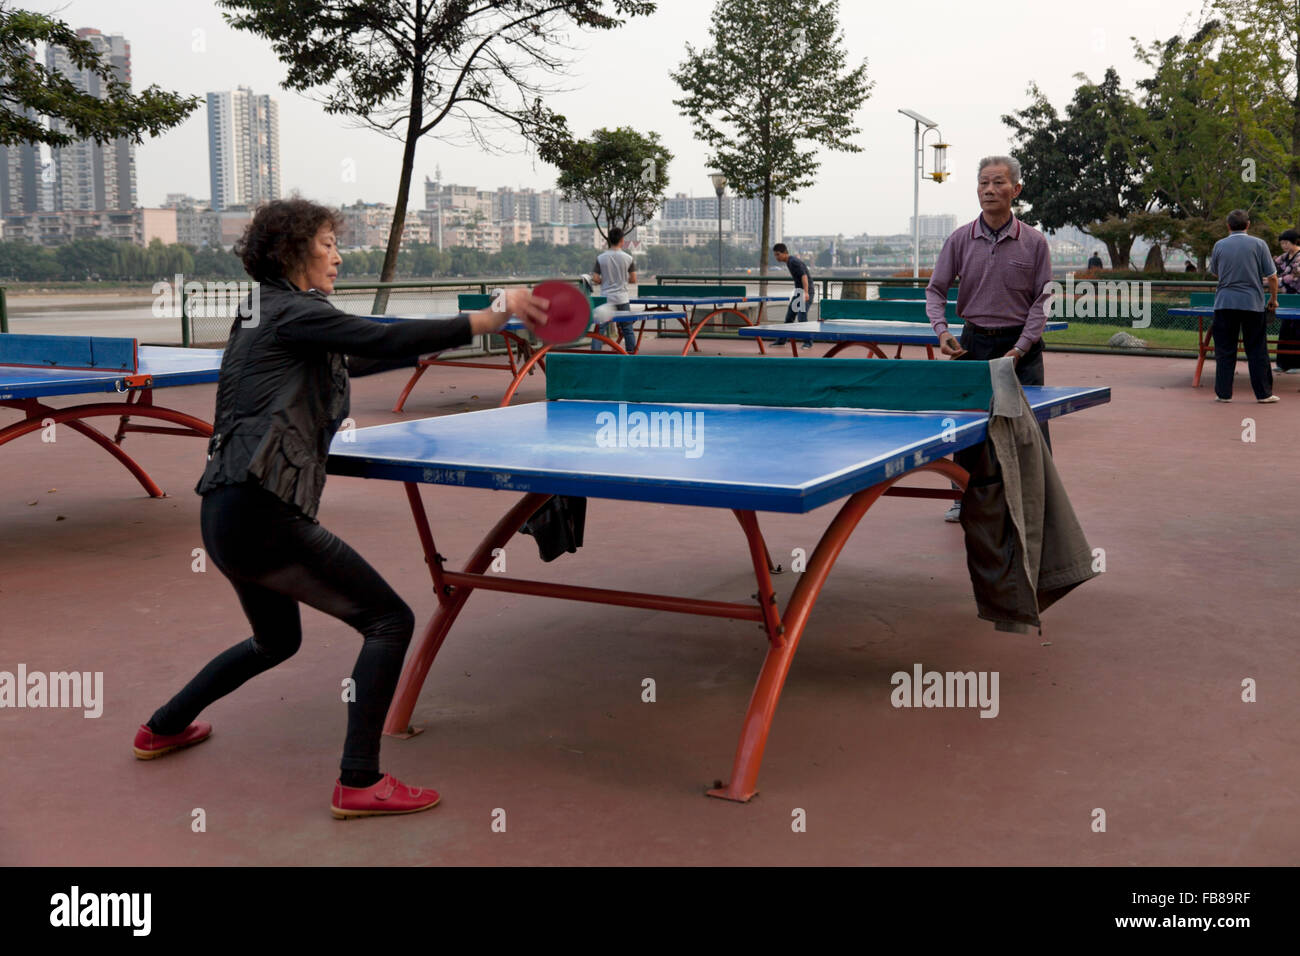 People play table tennis at a park on the riverfront at a typical city in China. Stock Photo